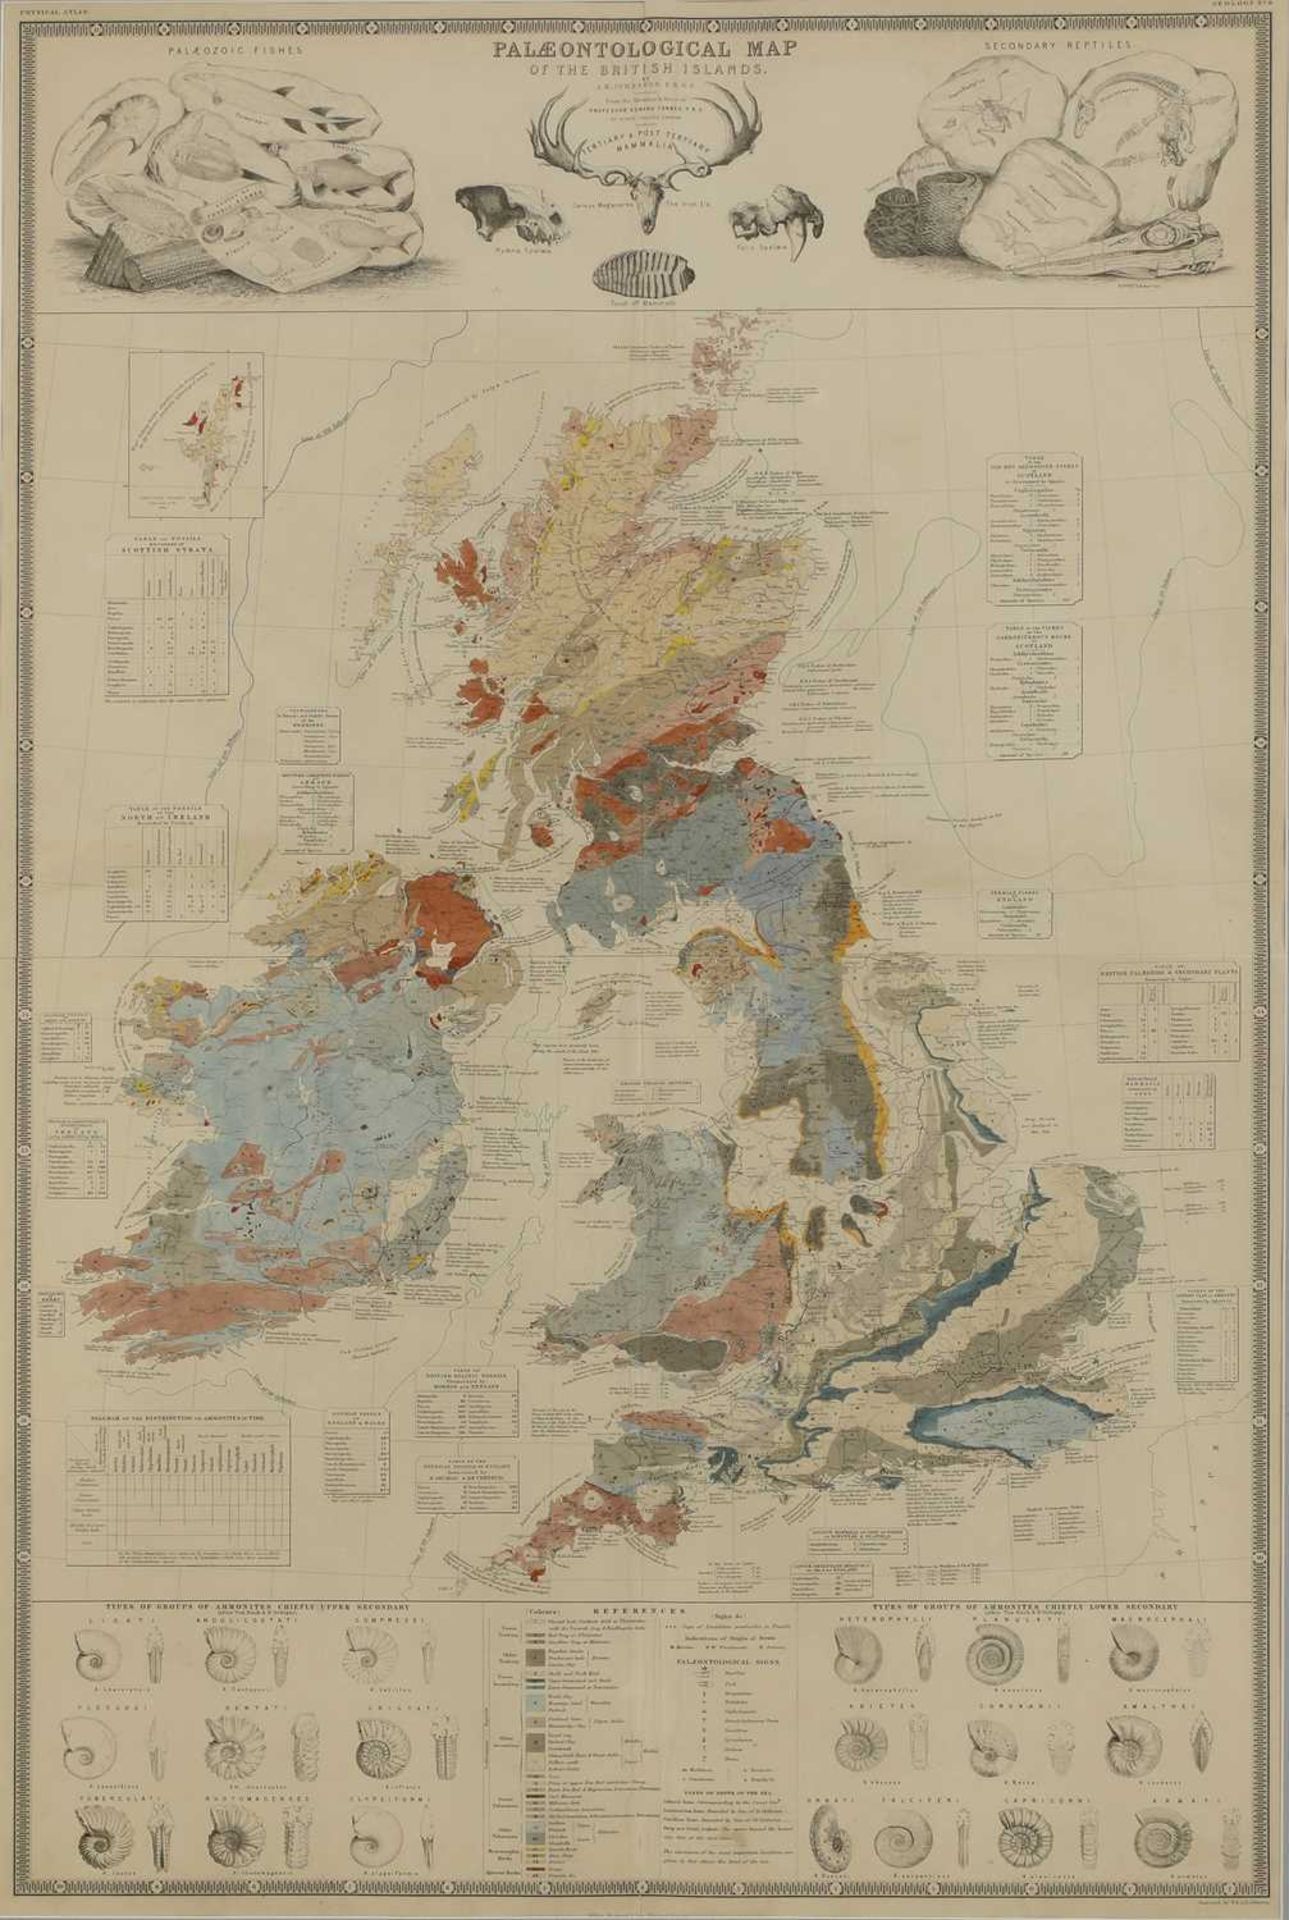 'Palaeontological map of the British Islands',